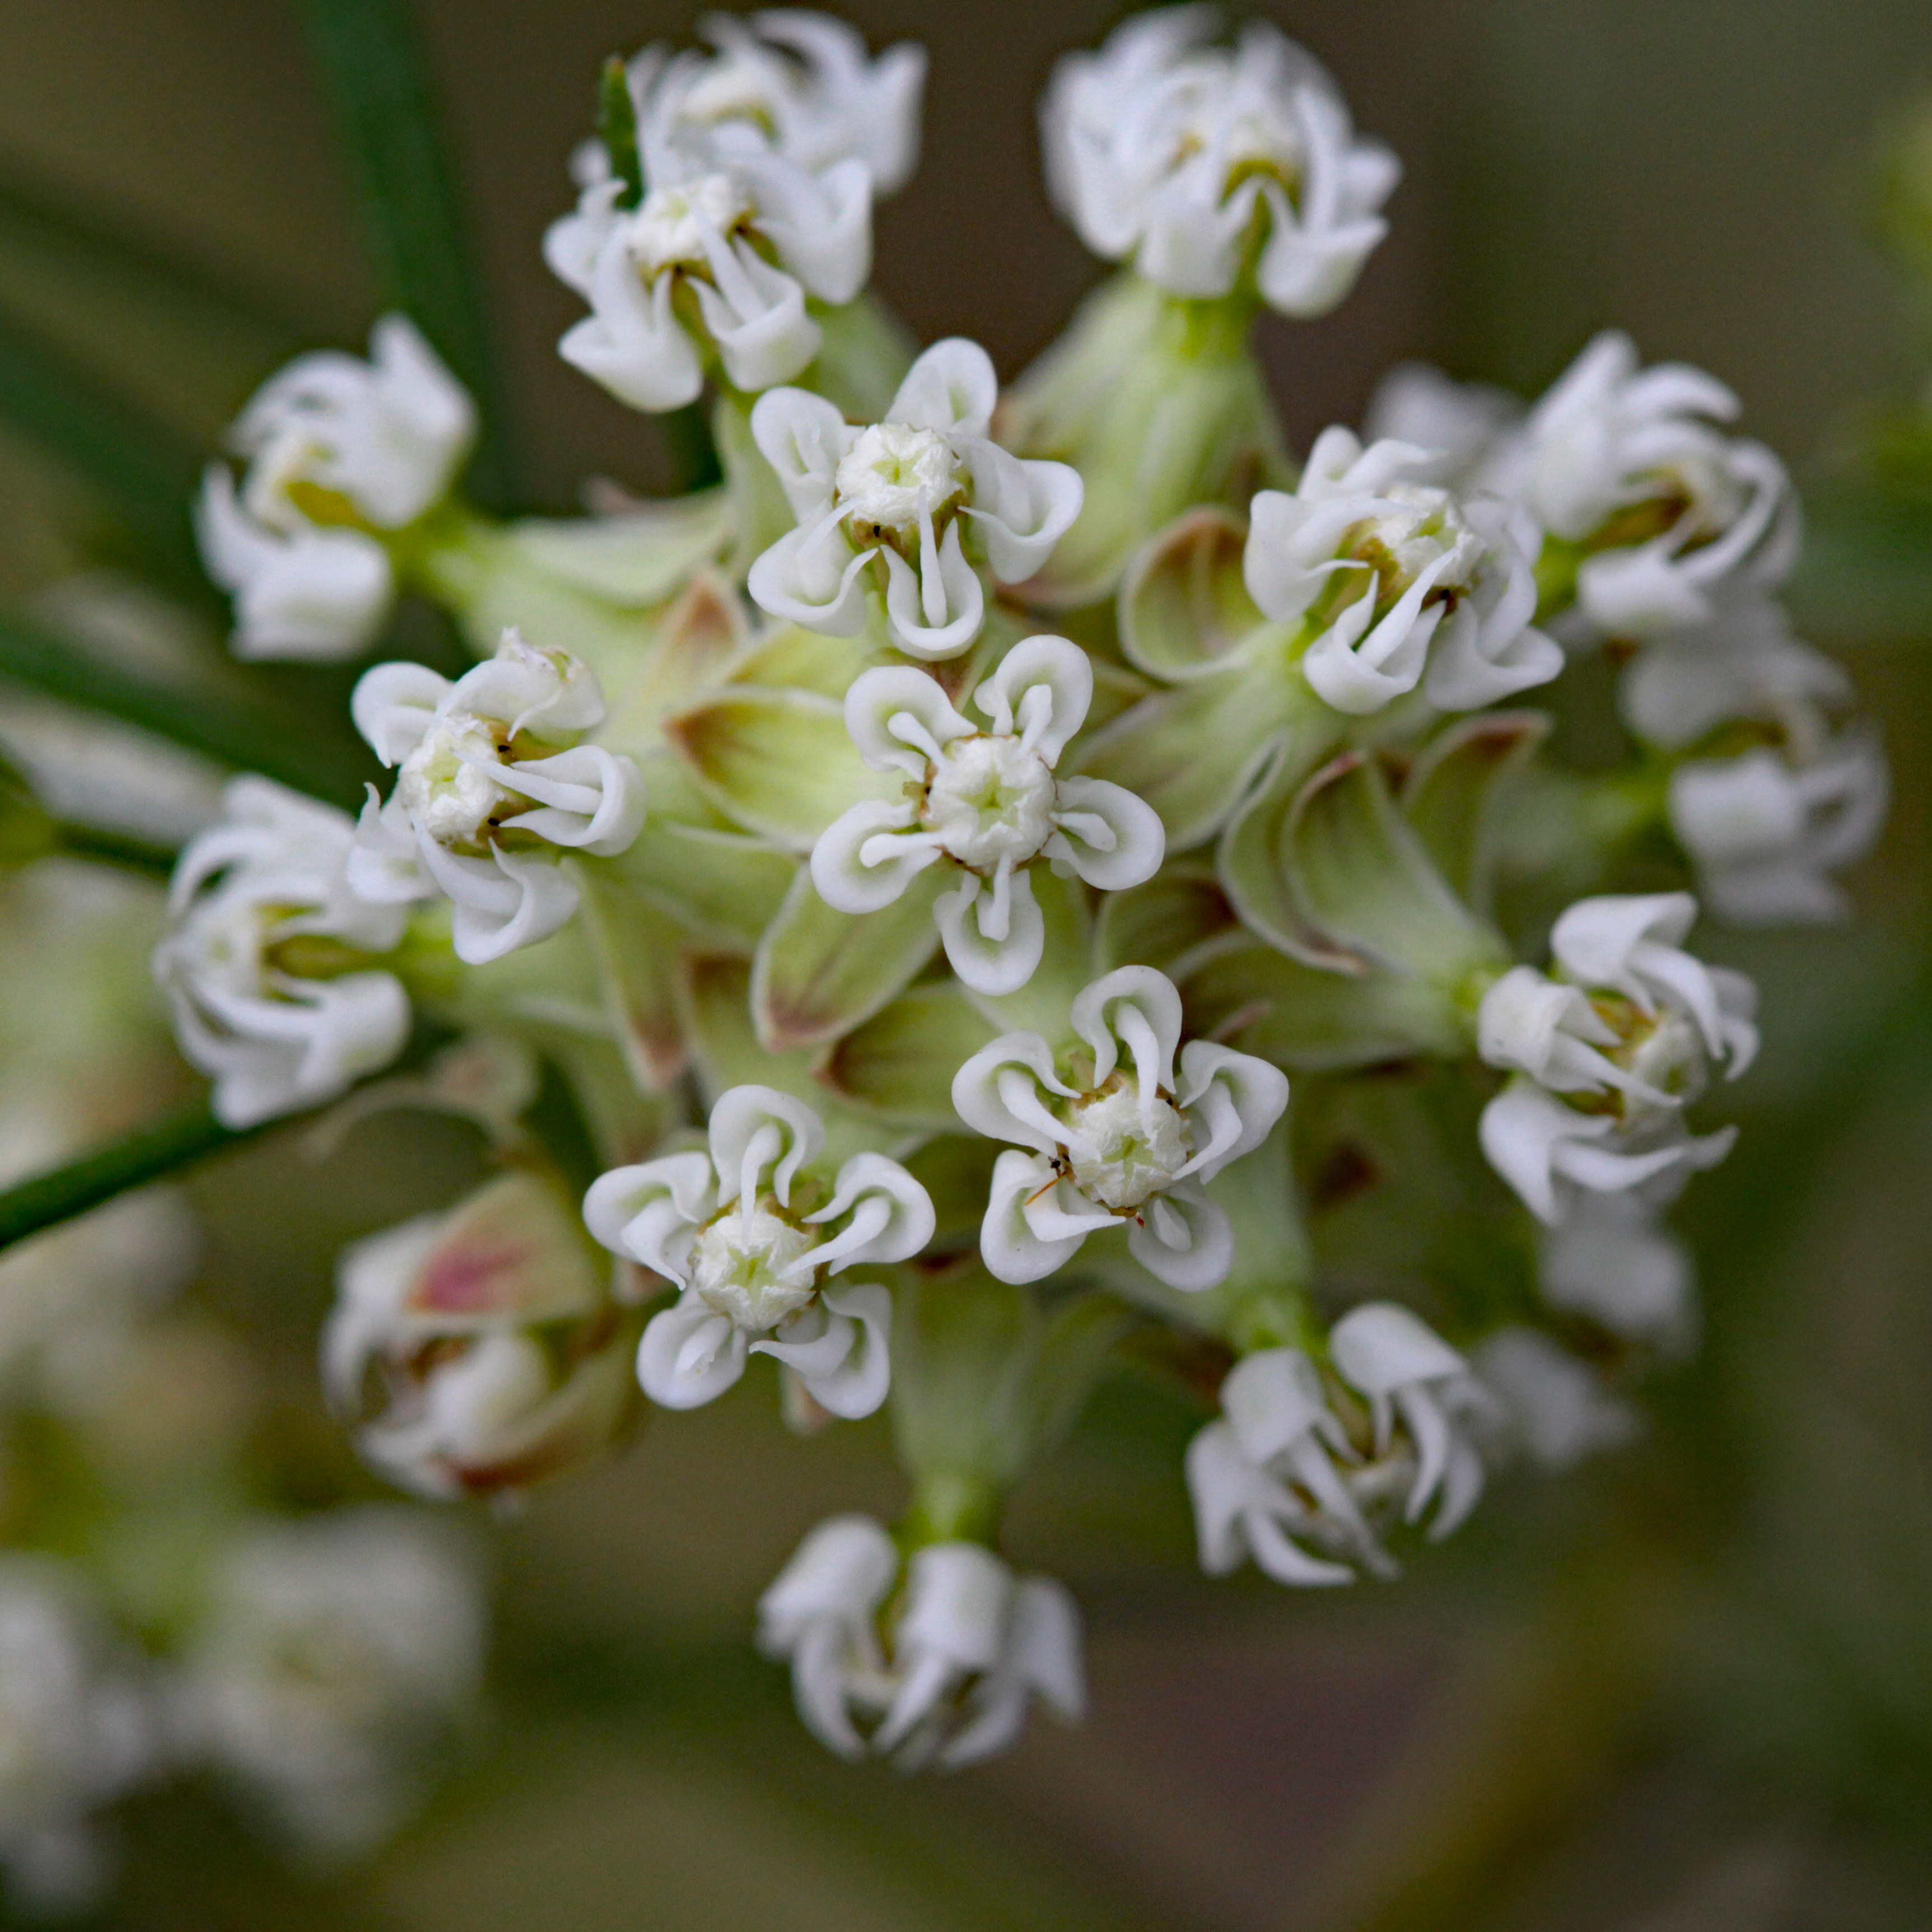 The Scientific Name is Asclepias verticillata. You will likely hear them called Whorled Milkweed. This picture shows the Asclepias verticillata blossom detail.  Blossoms are white with green strongly-reflexed corolla lobes often tinged with purple. of Asclepias verticillata